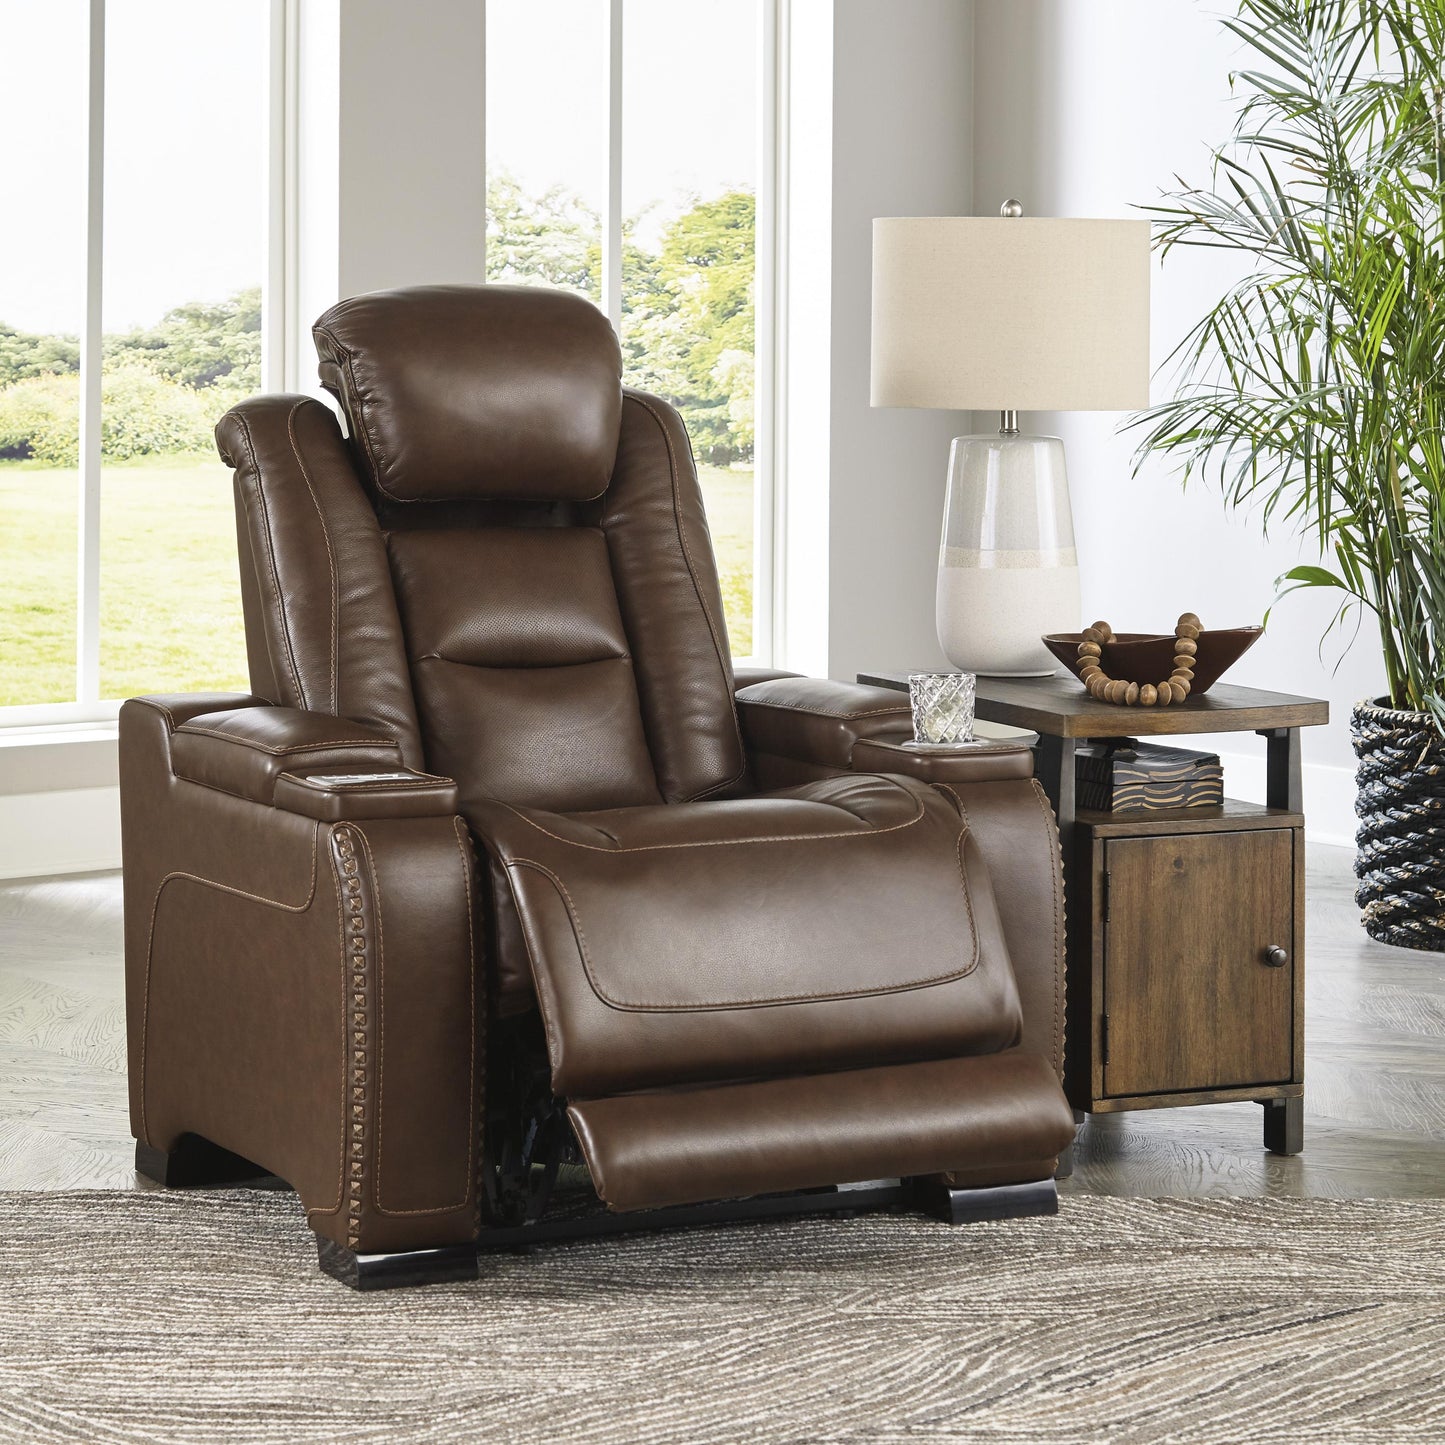 Signature Design by Ashley The Man-Den Power Leather Match Recliner U8530613 IMAGE 6